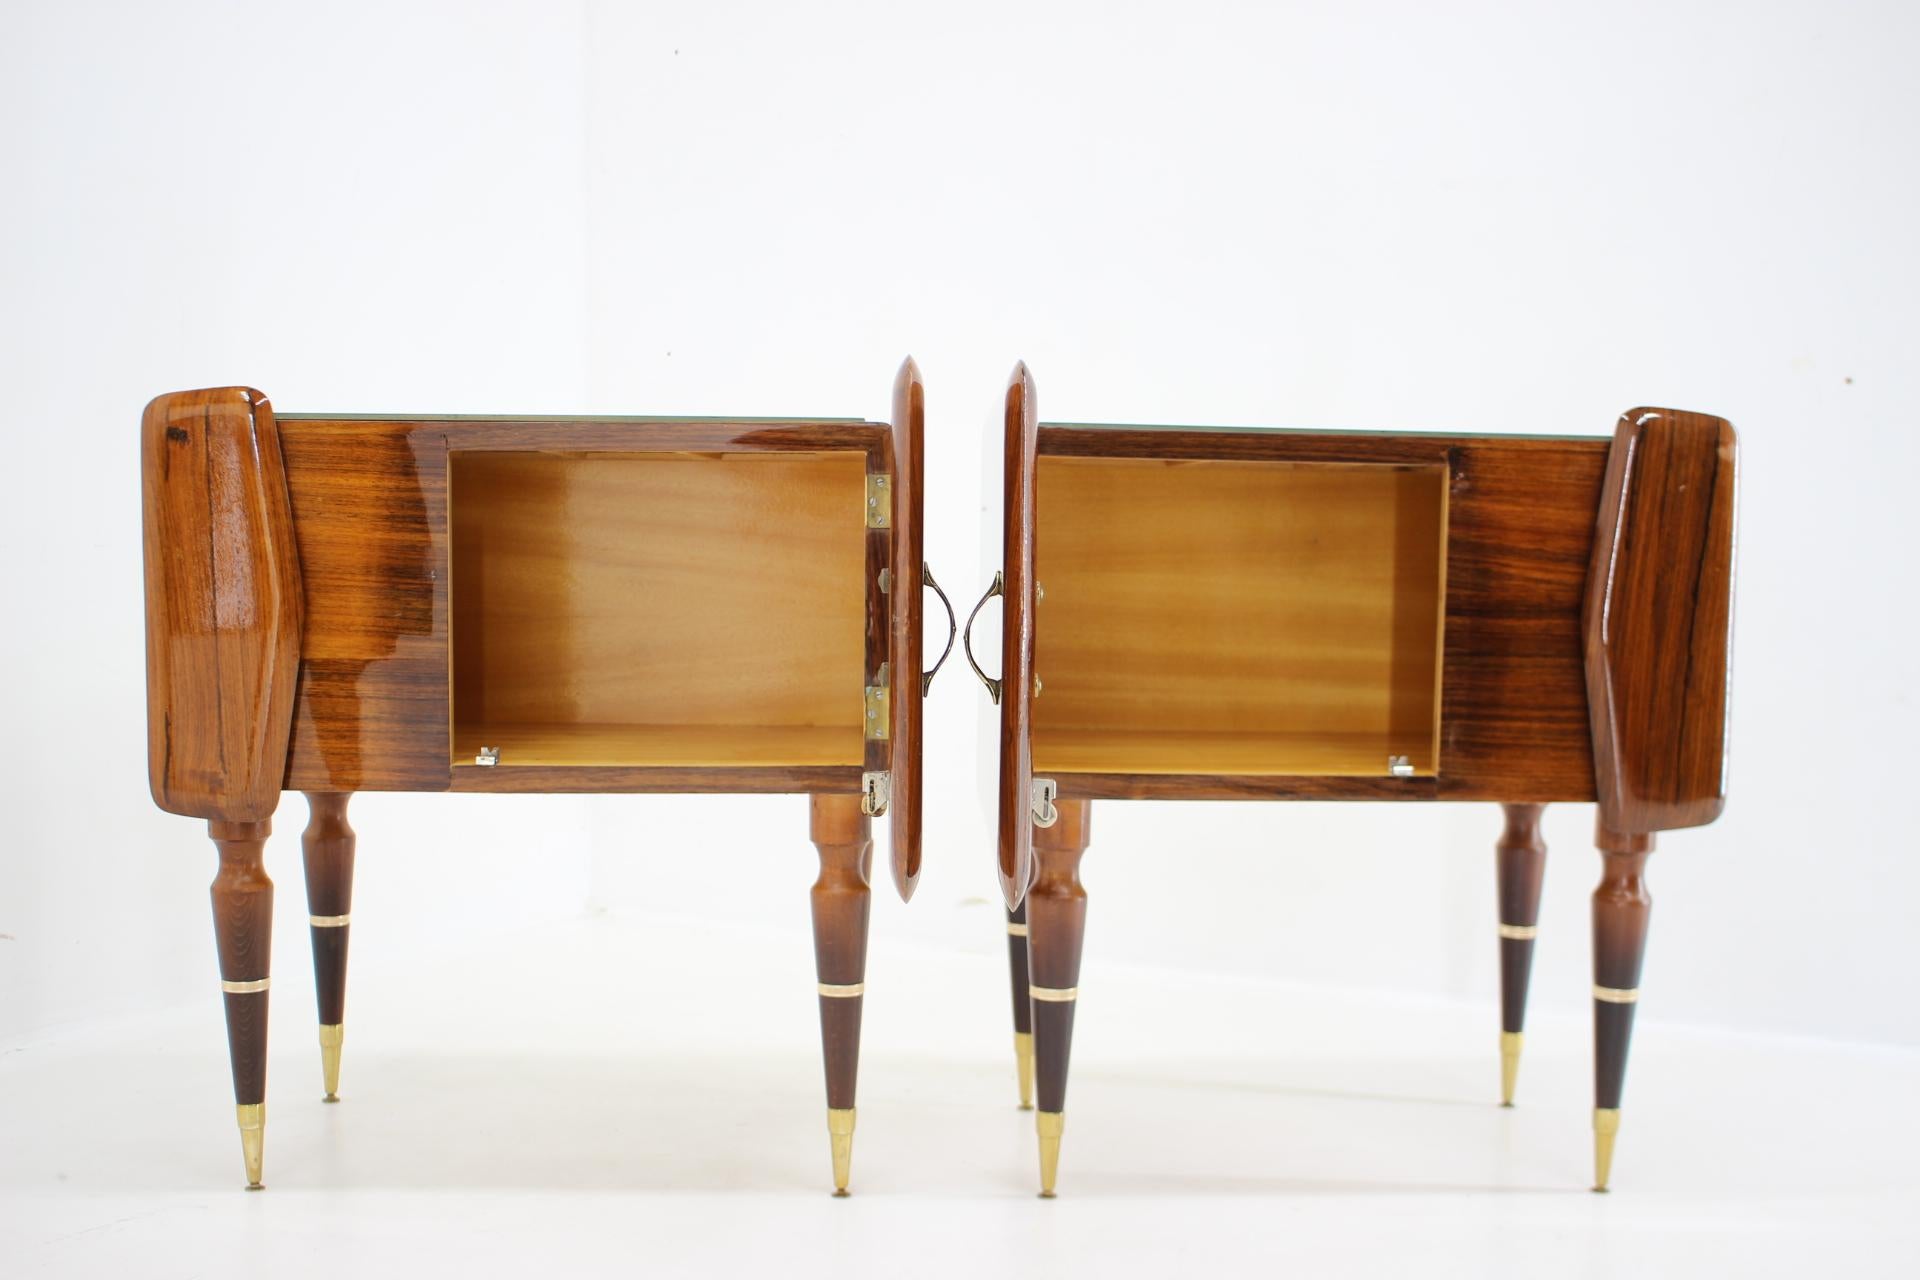 1960s Set of Sculptural Wooden Bedside Tables and Sideboard, Italy For Sale 4